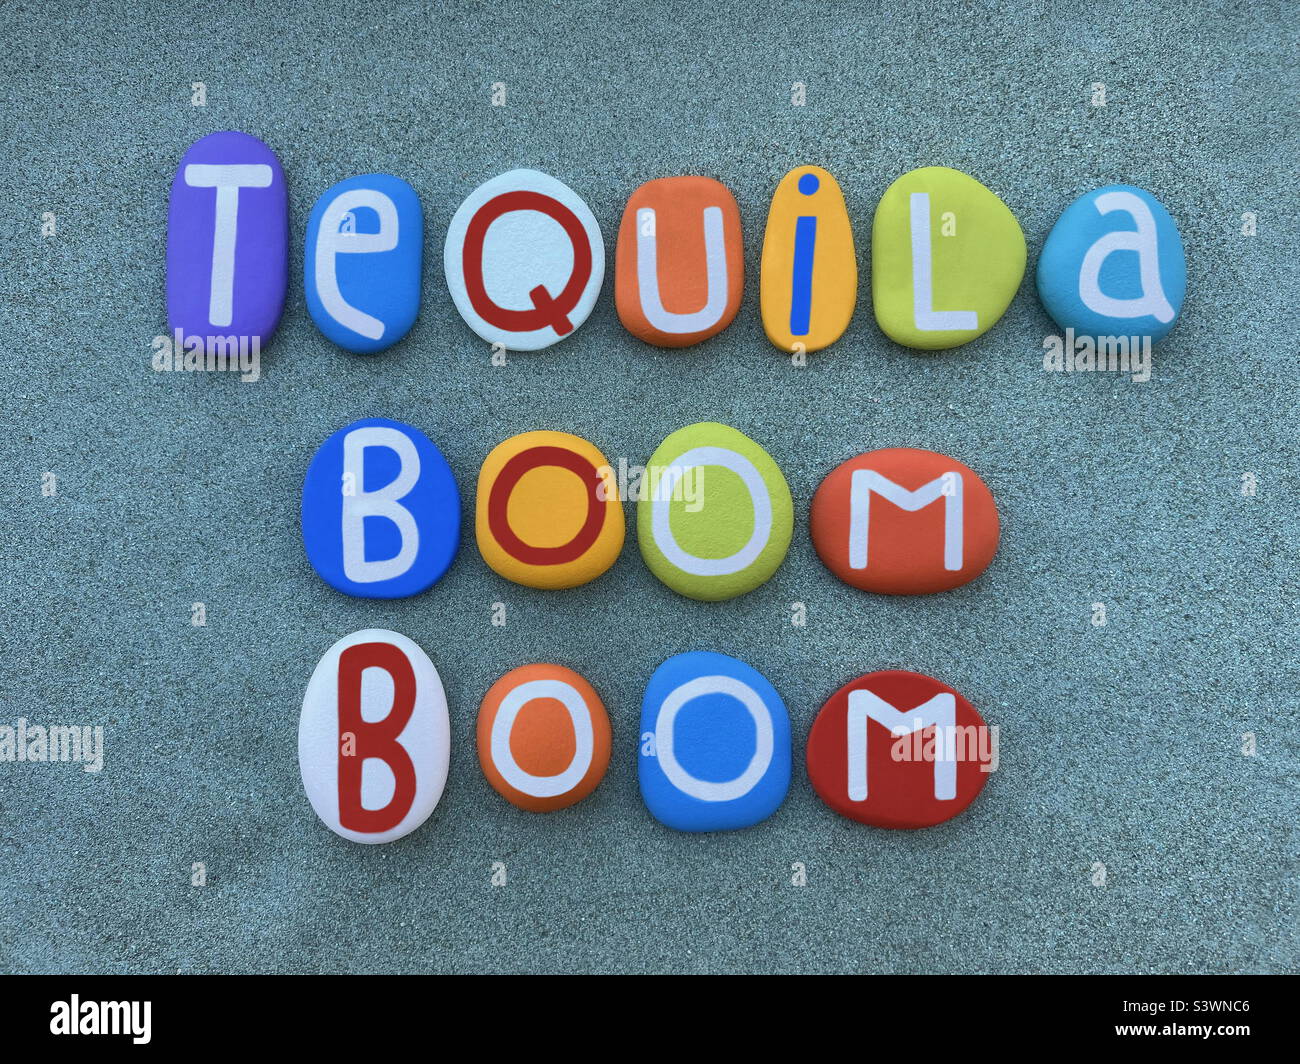 Tequila boom boom, creative text of cocktail name composed with hand painted multi colored stone letters over green sand Stock Photo